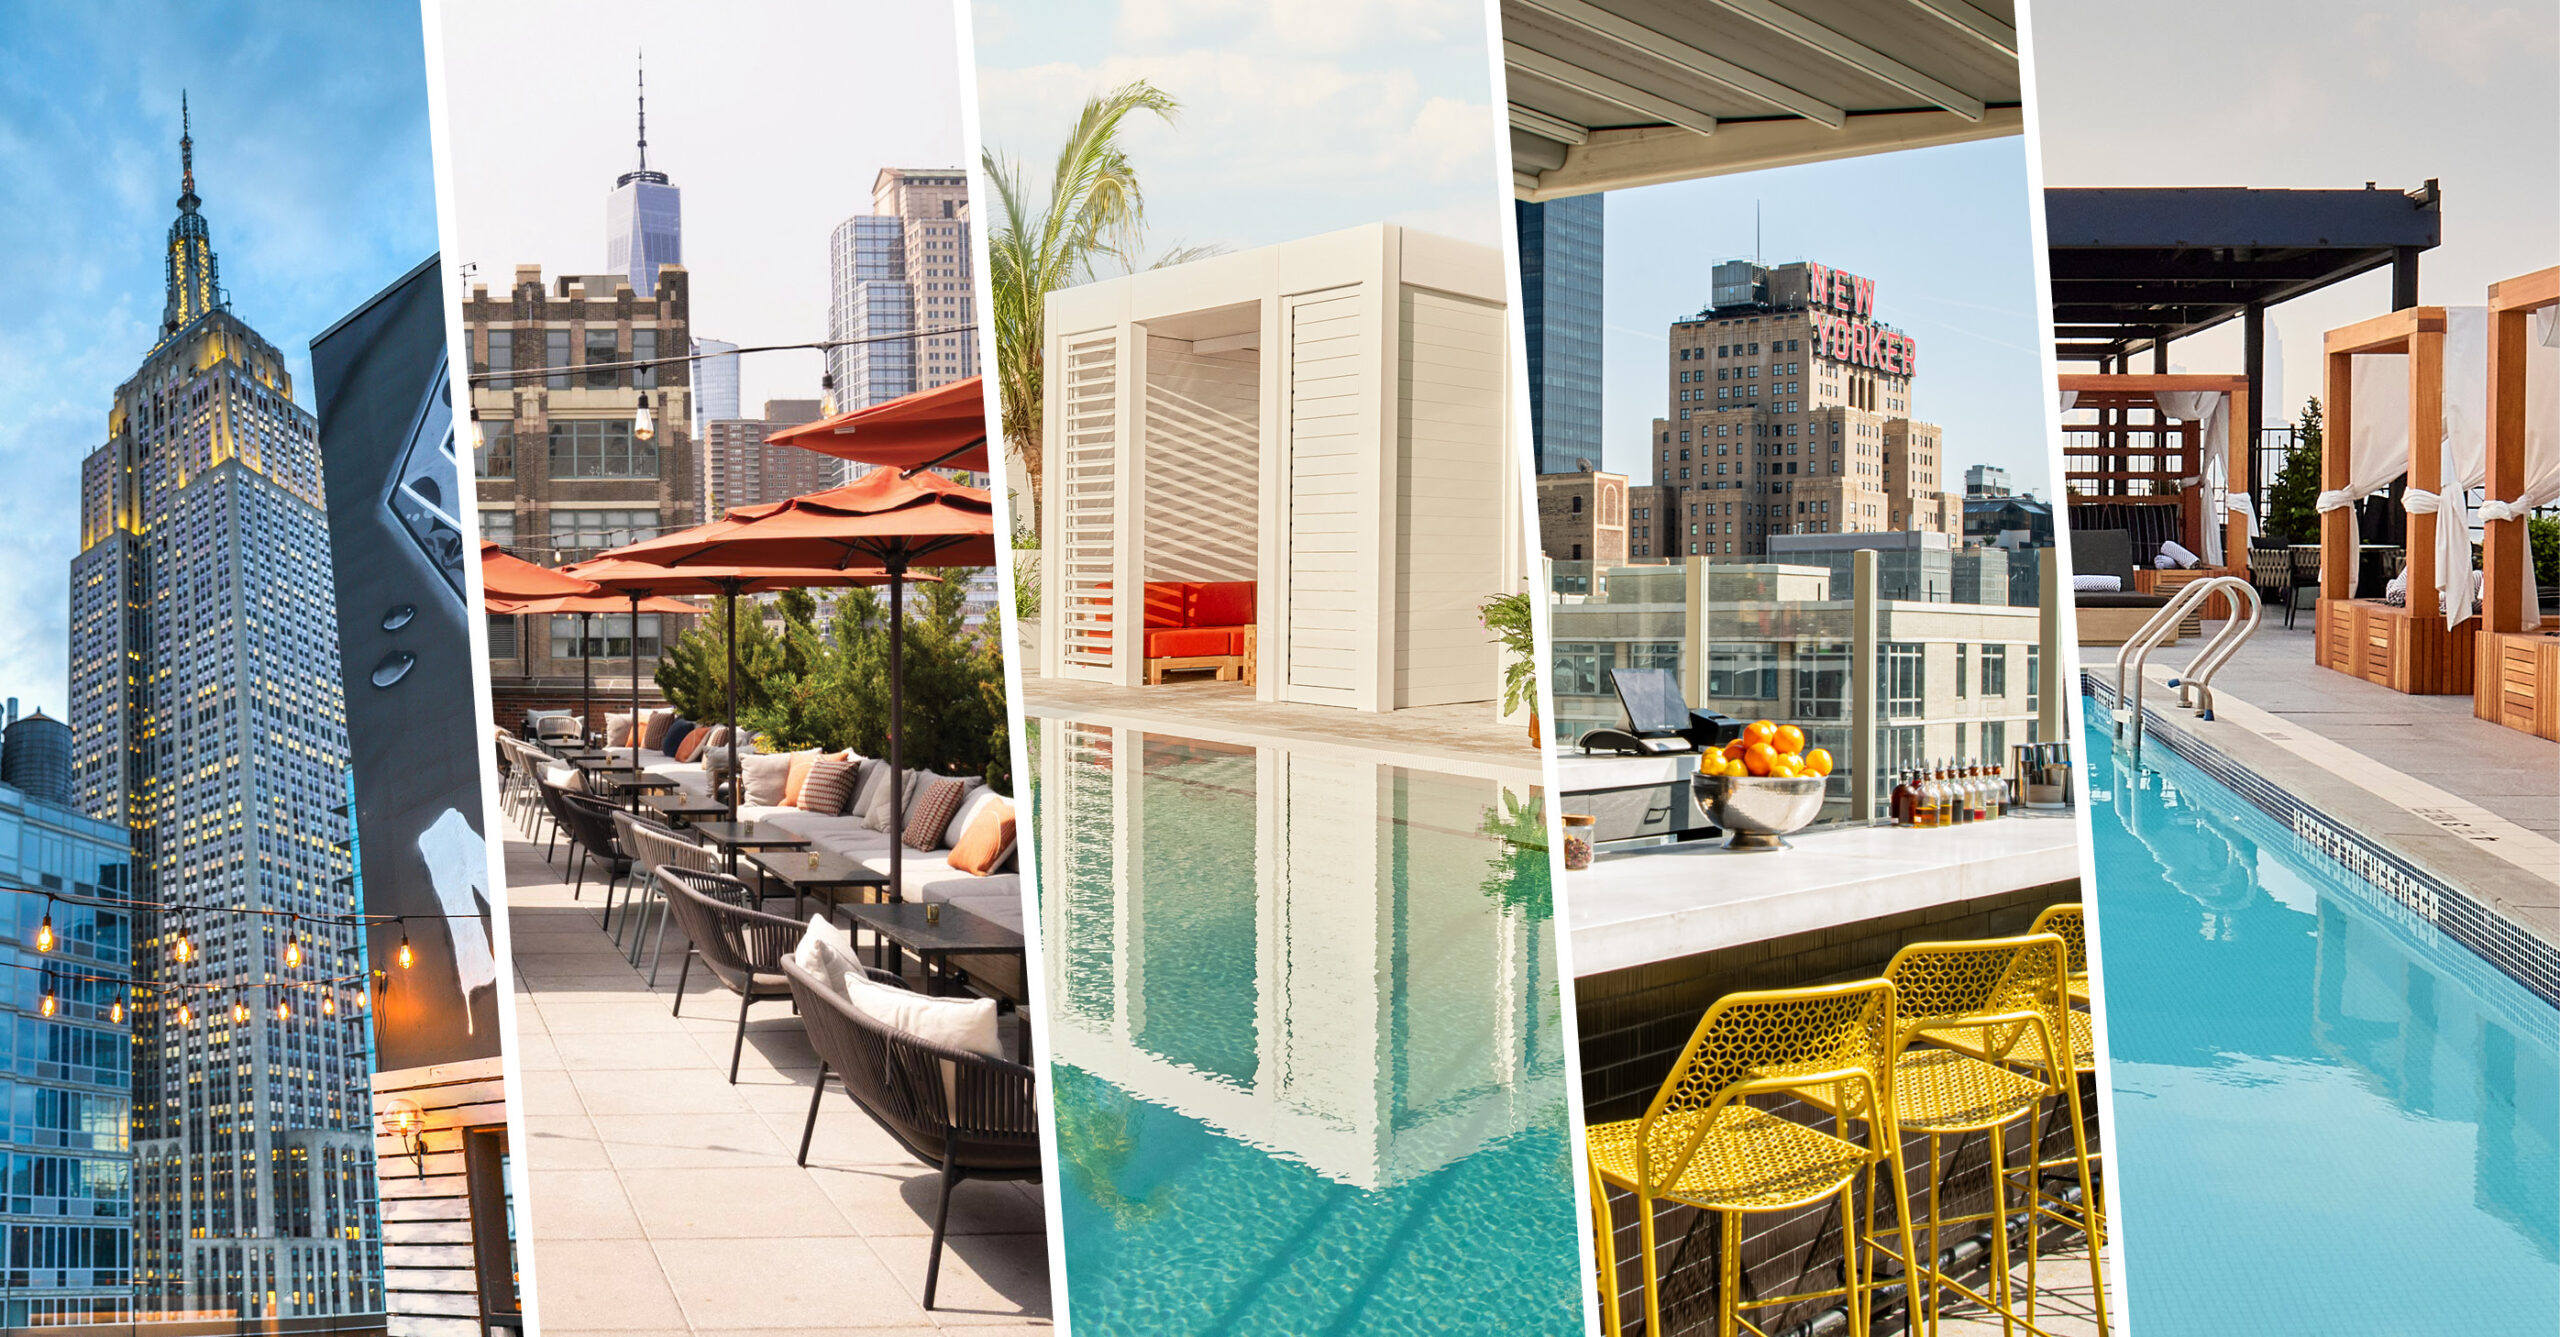 A collage featuring various rooftop scenes: a tall skyscraper, outdoor seating with umbrellas, a cabana by a pool, a bar with seating, and a rooftop swimming pool.